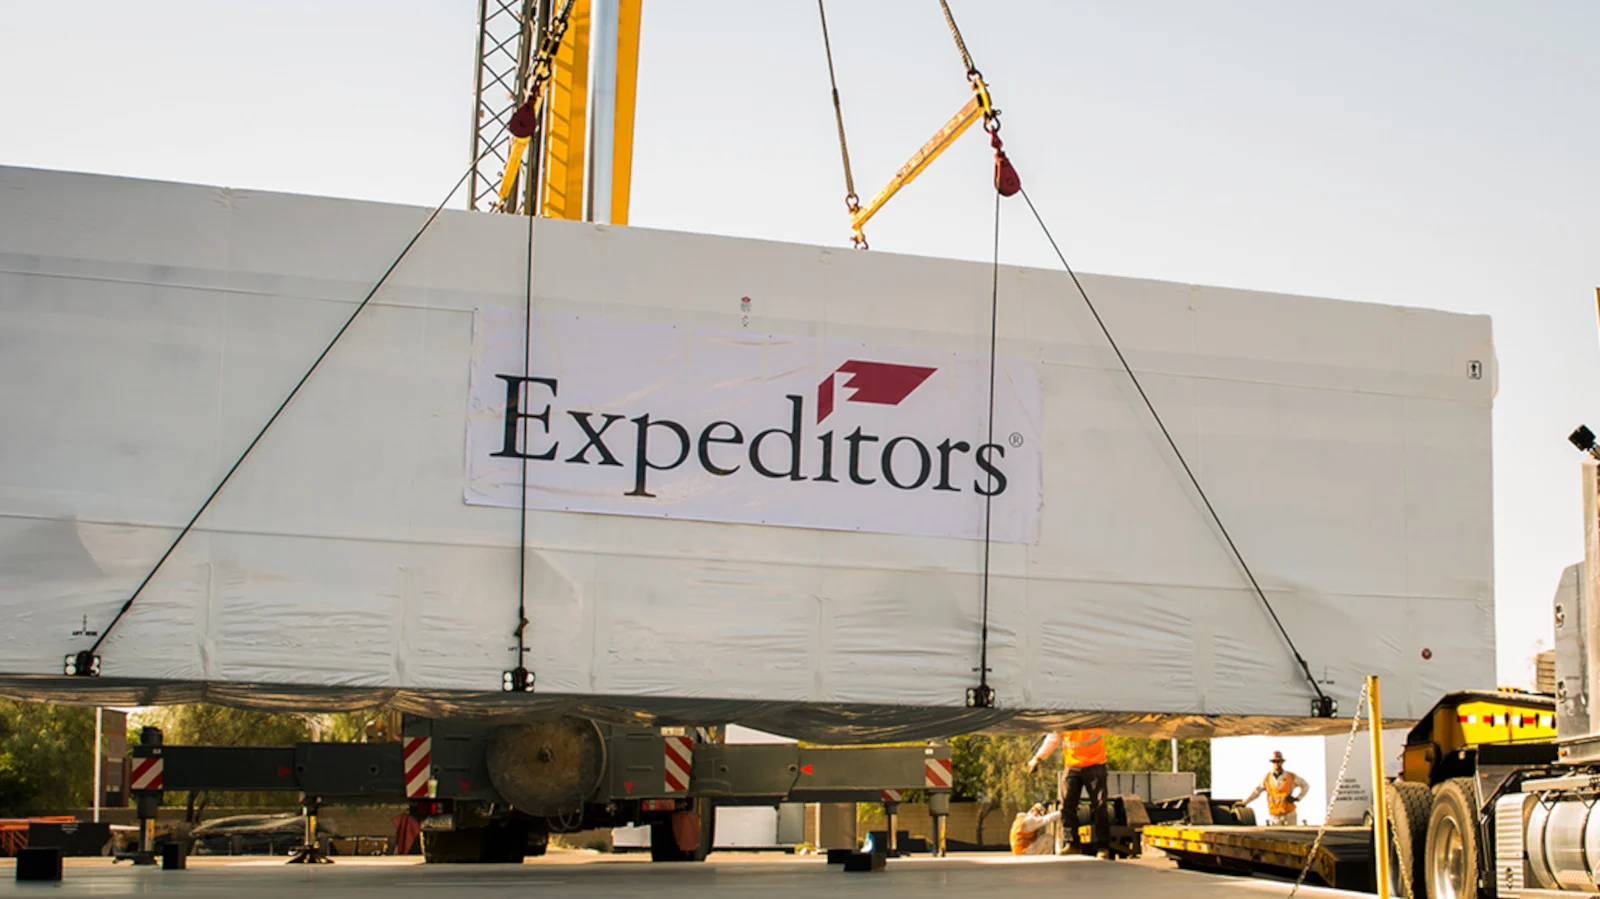 Expeditors was hit by a severe cyberattack which led to this 1